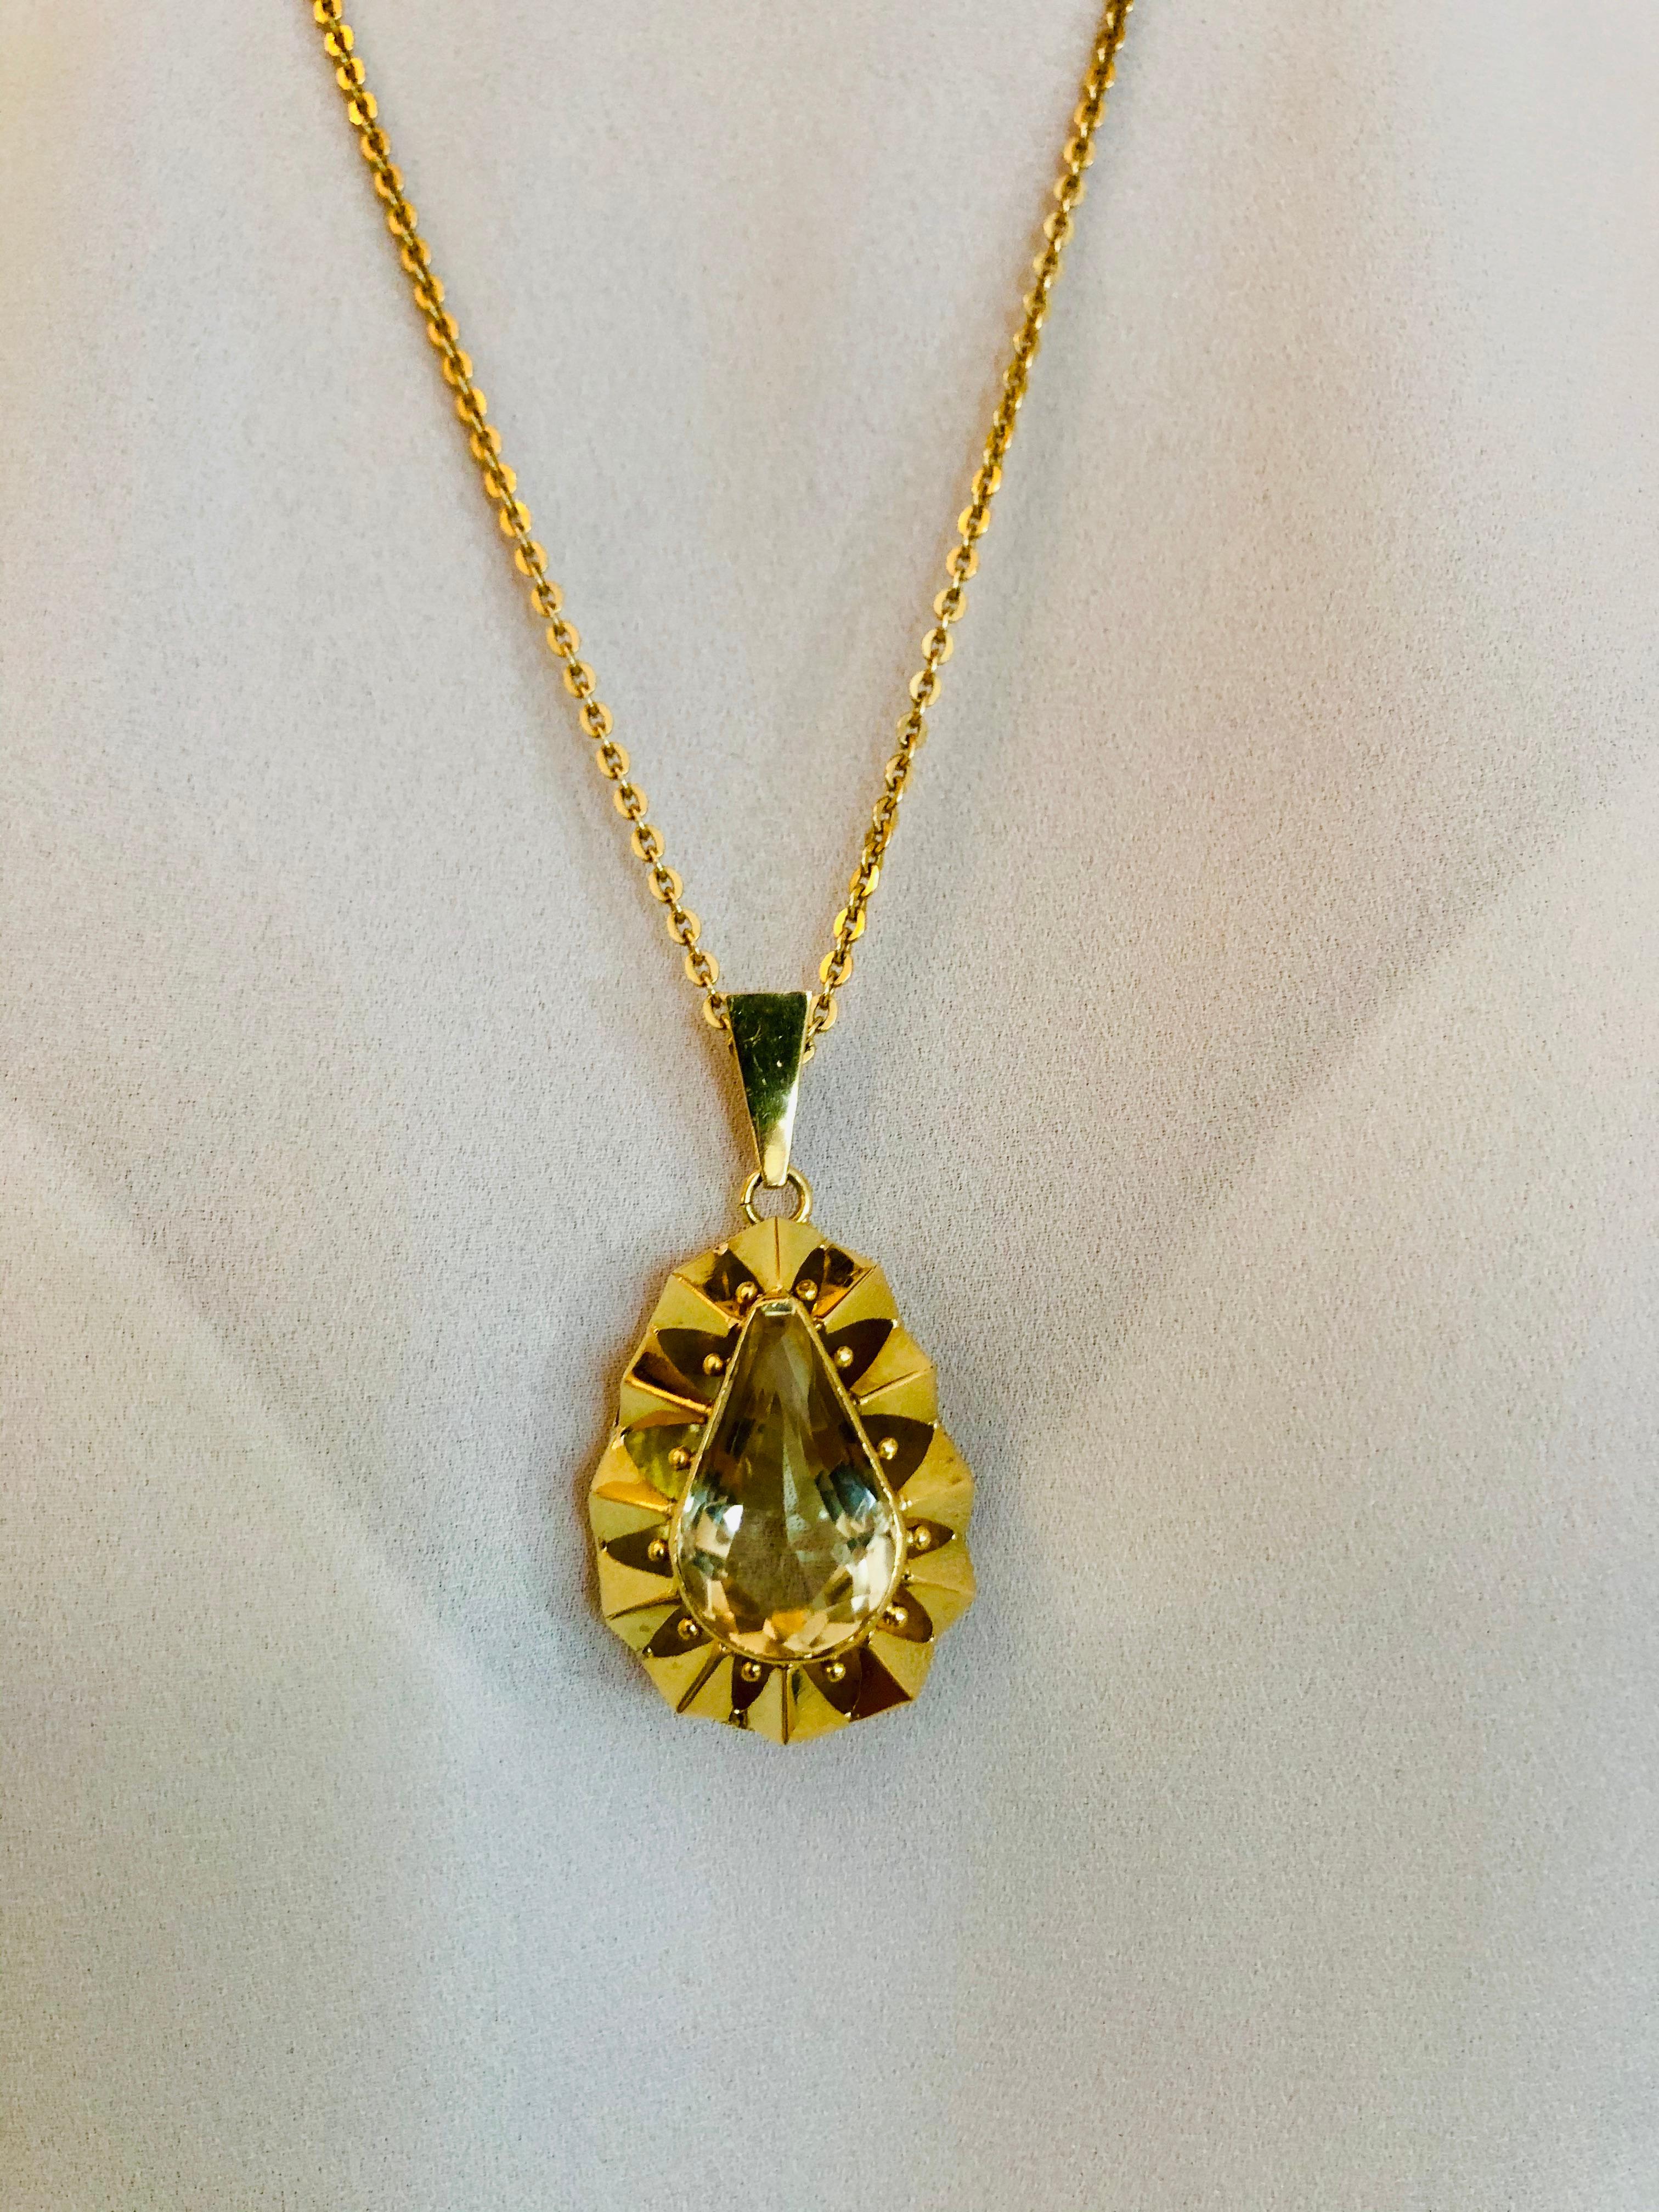 Lemon Citrine Pendant Necklace In Good Condition For Sale In London, GB